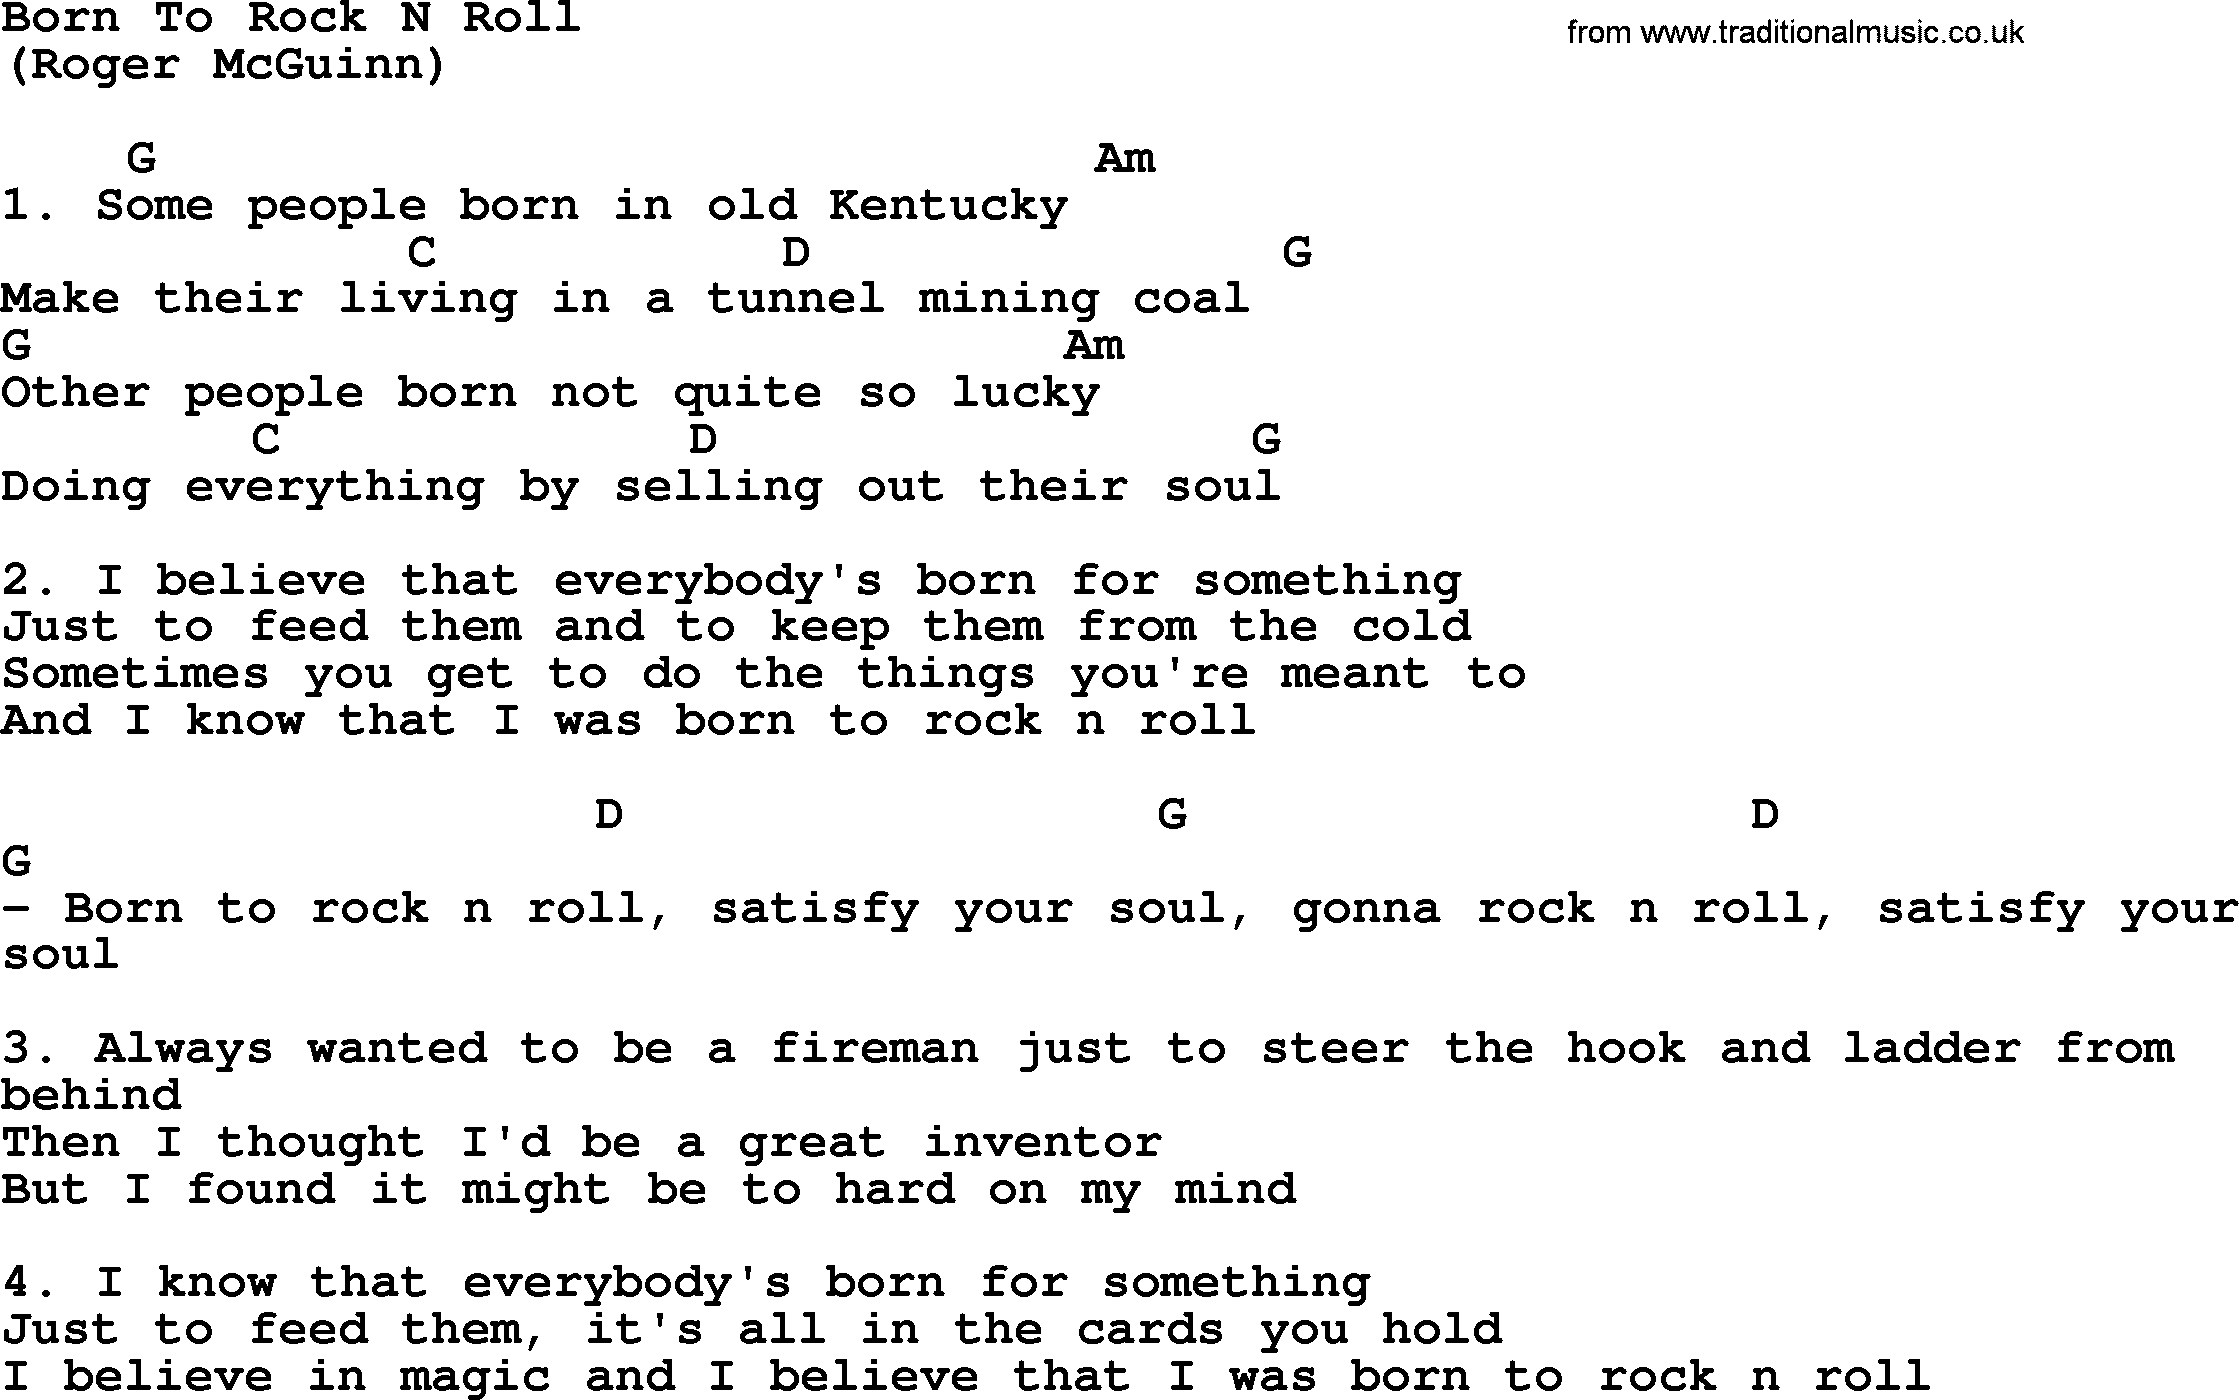 The Byrds song Born To Rock N Roll, lyrics and chords